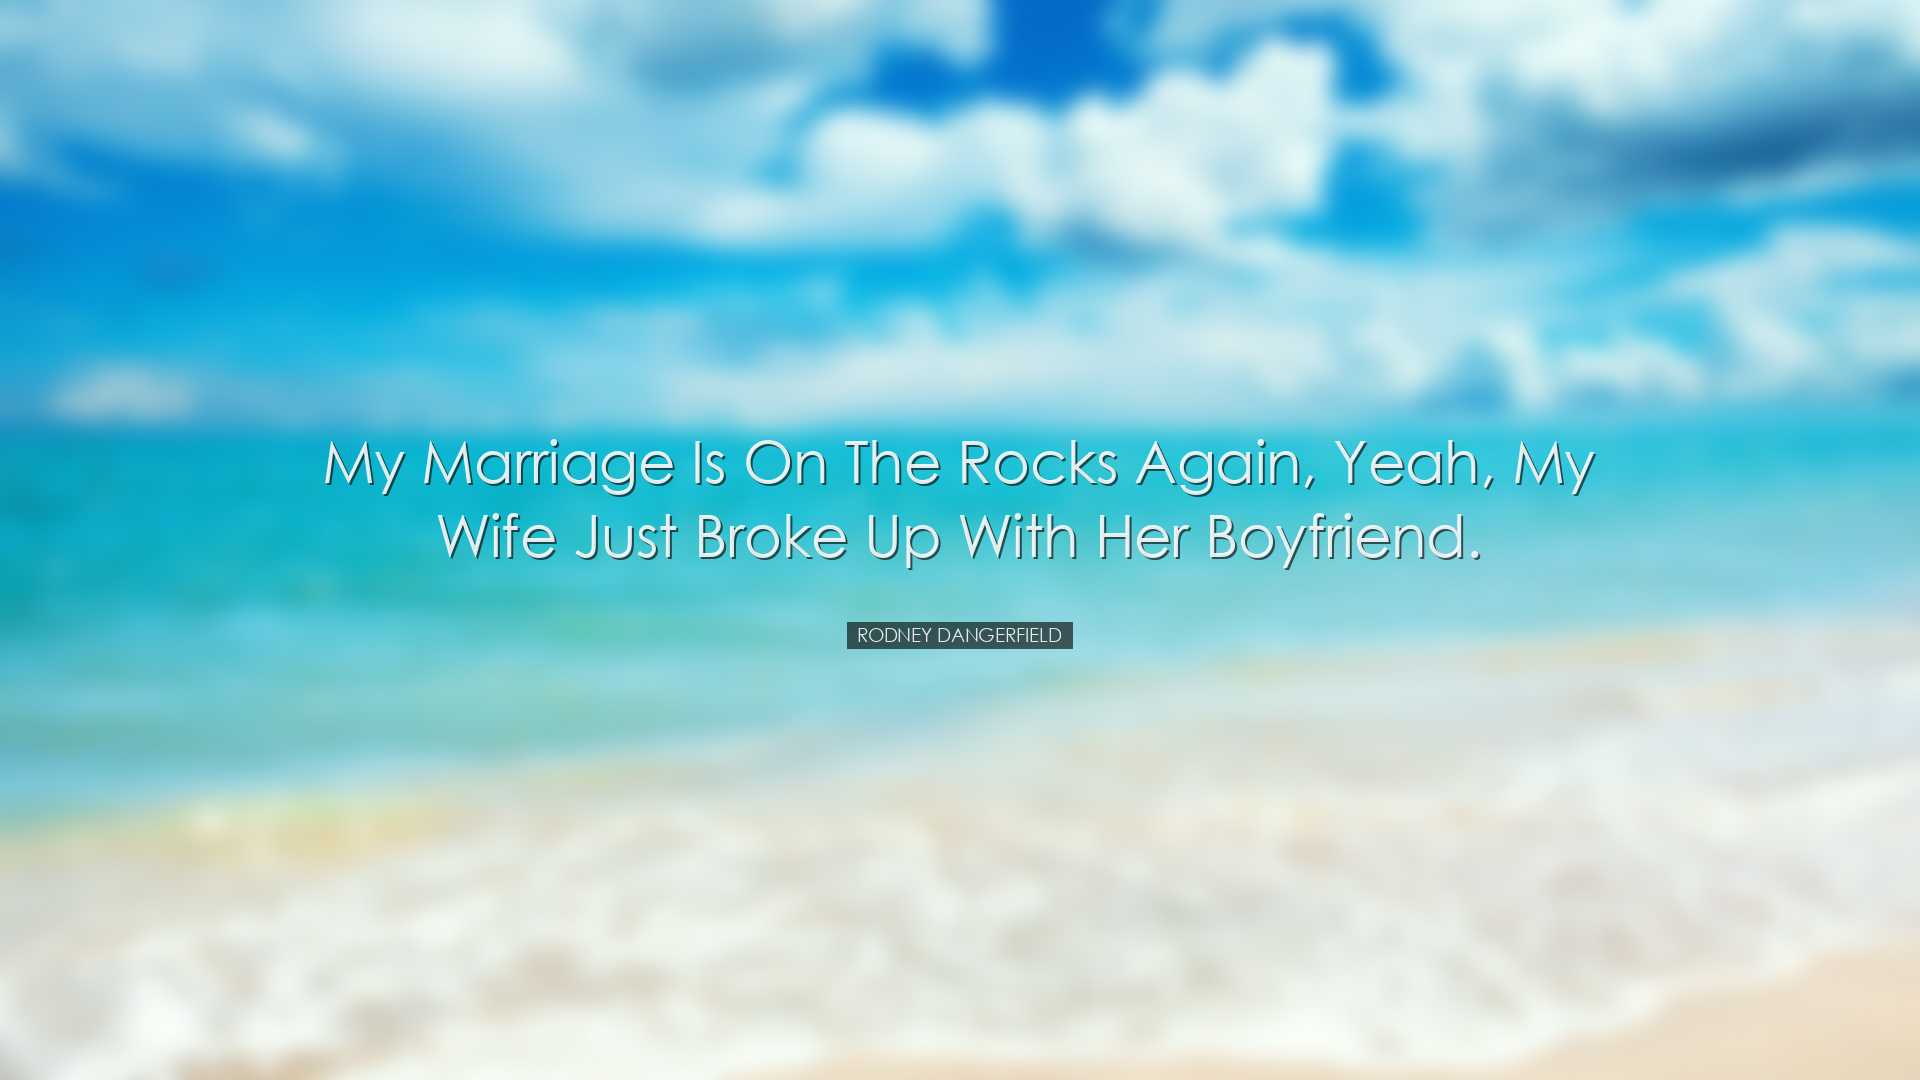 My marriage is on the rocks again, yeah, my wife just broke up wit